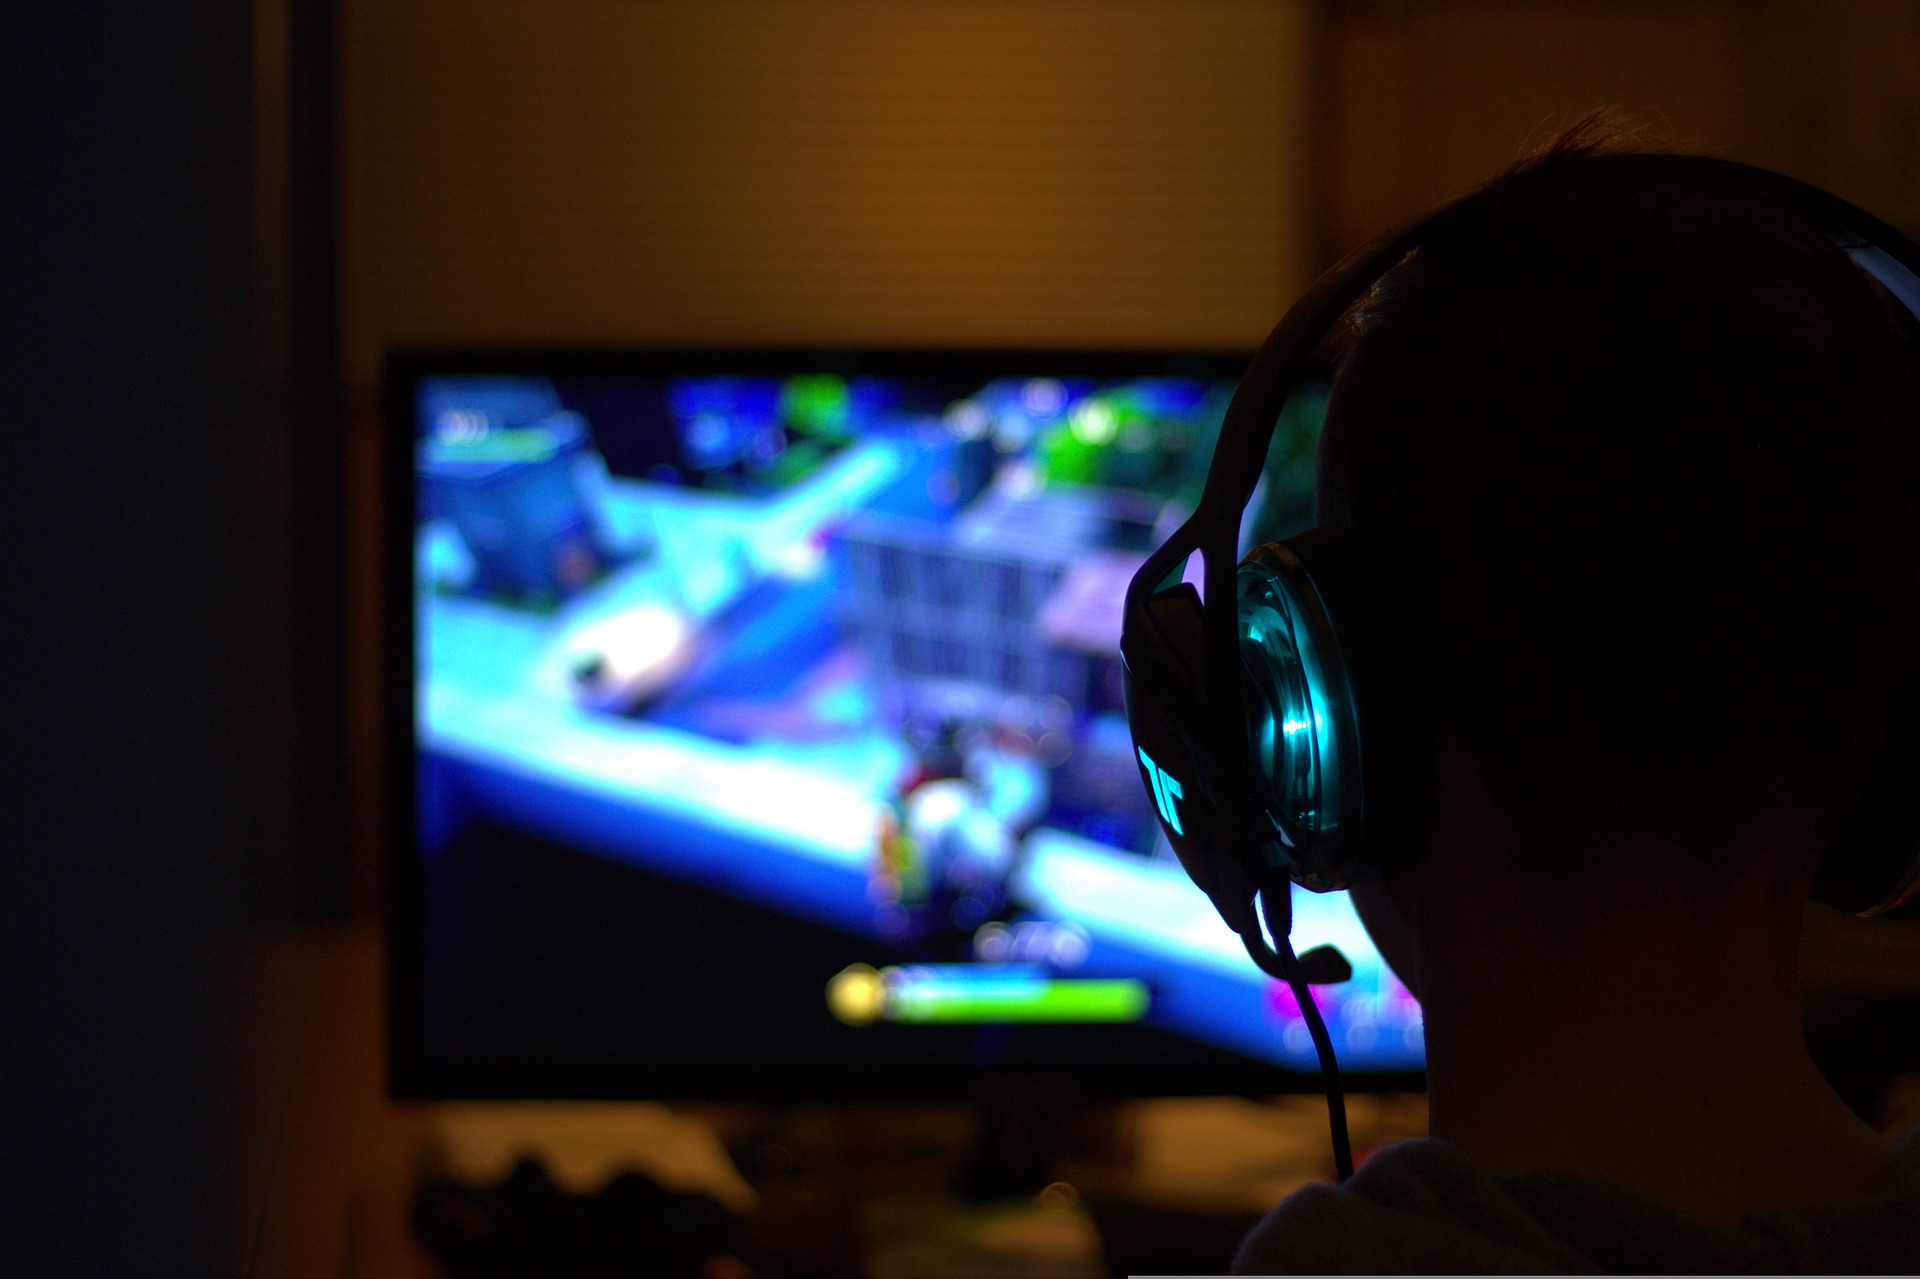 A gamer using headphones is playing on a TV.